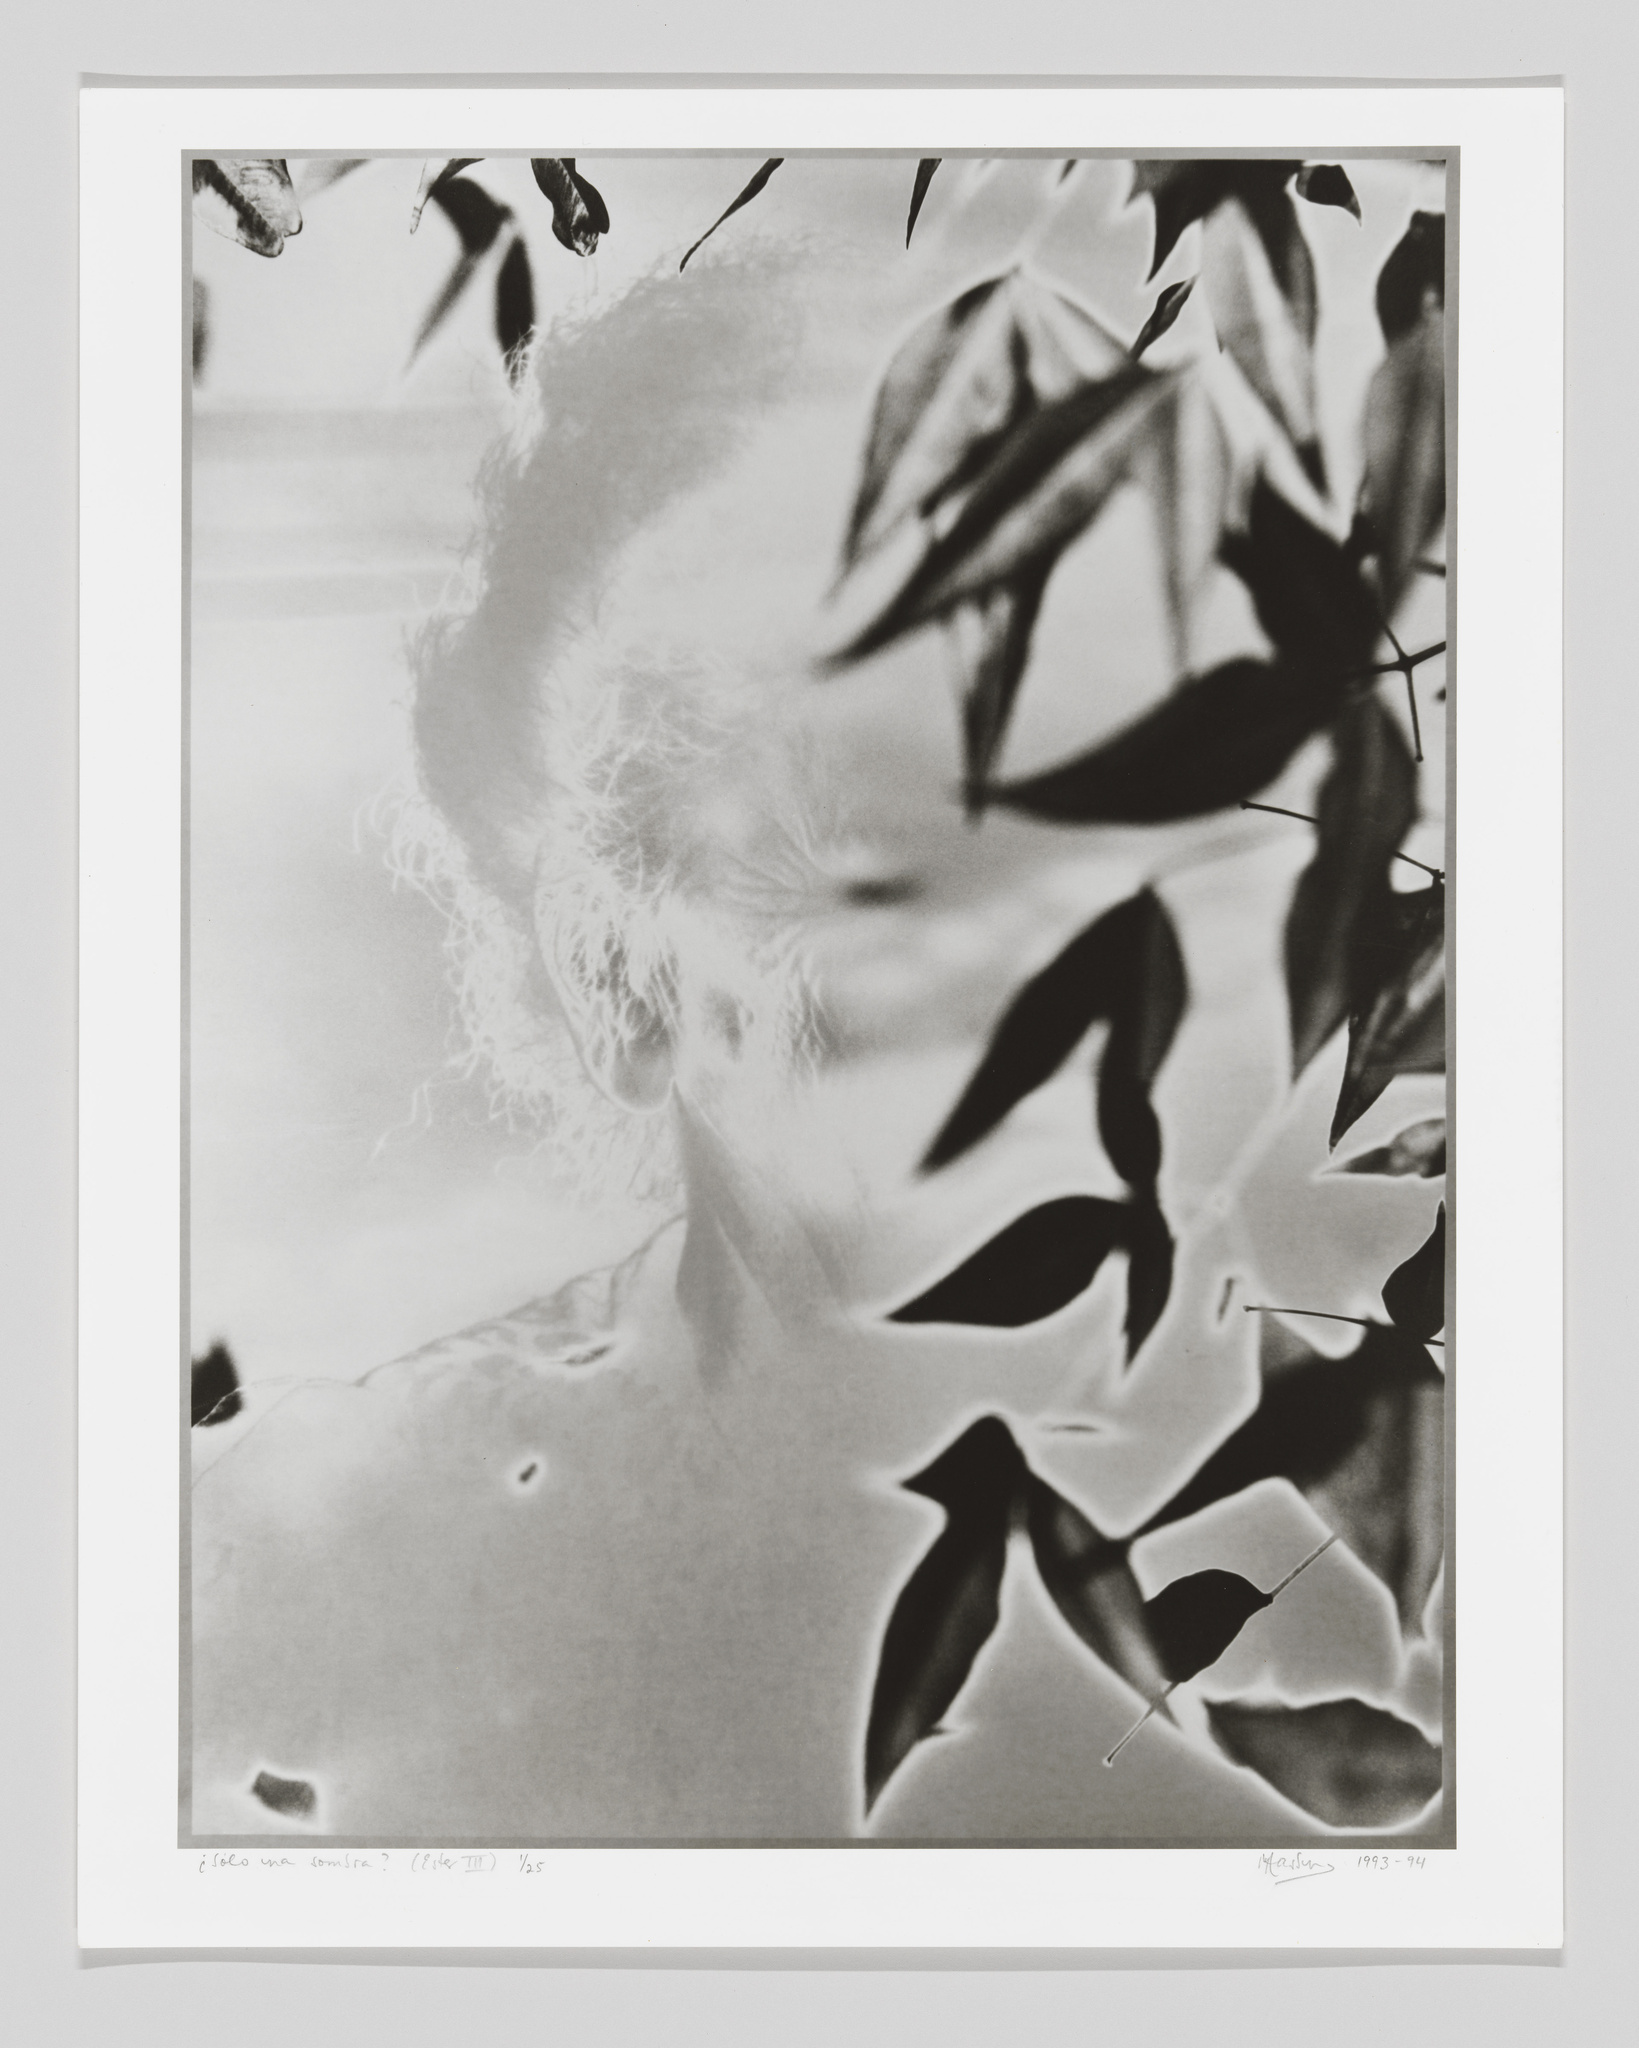 The ghostly image of an older person with dark leaves superimposed on top.